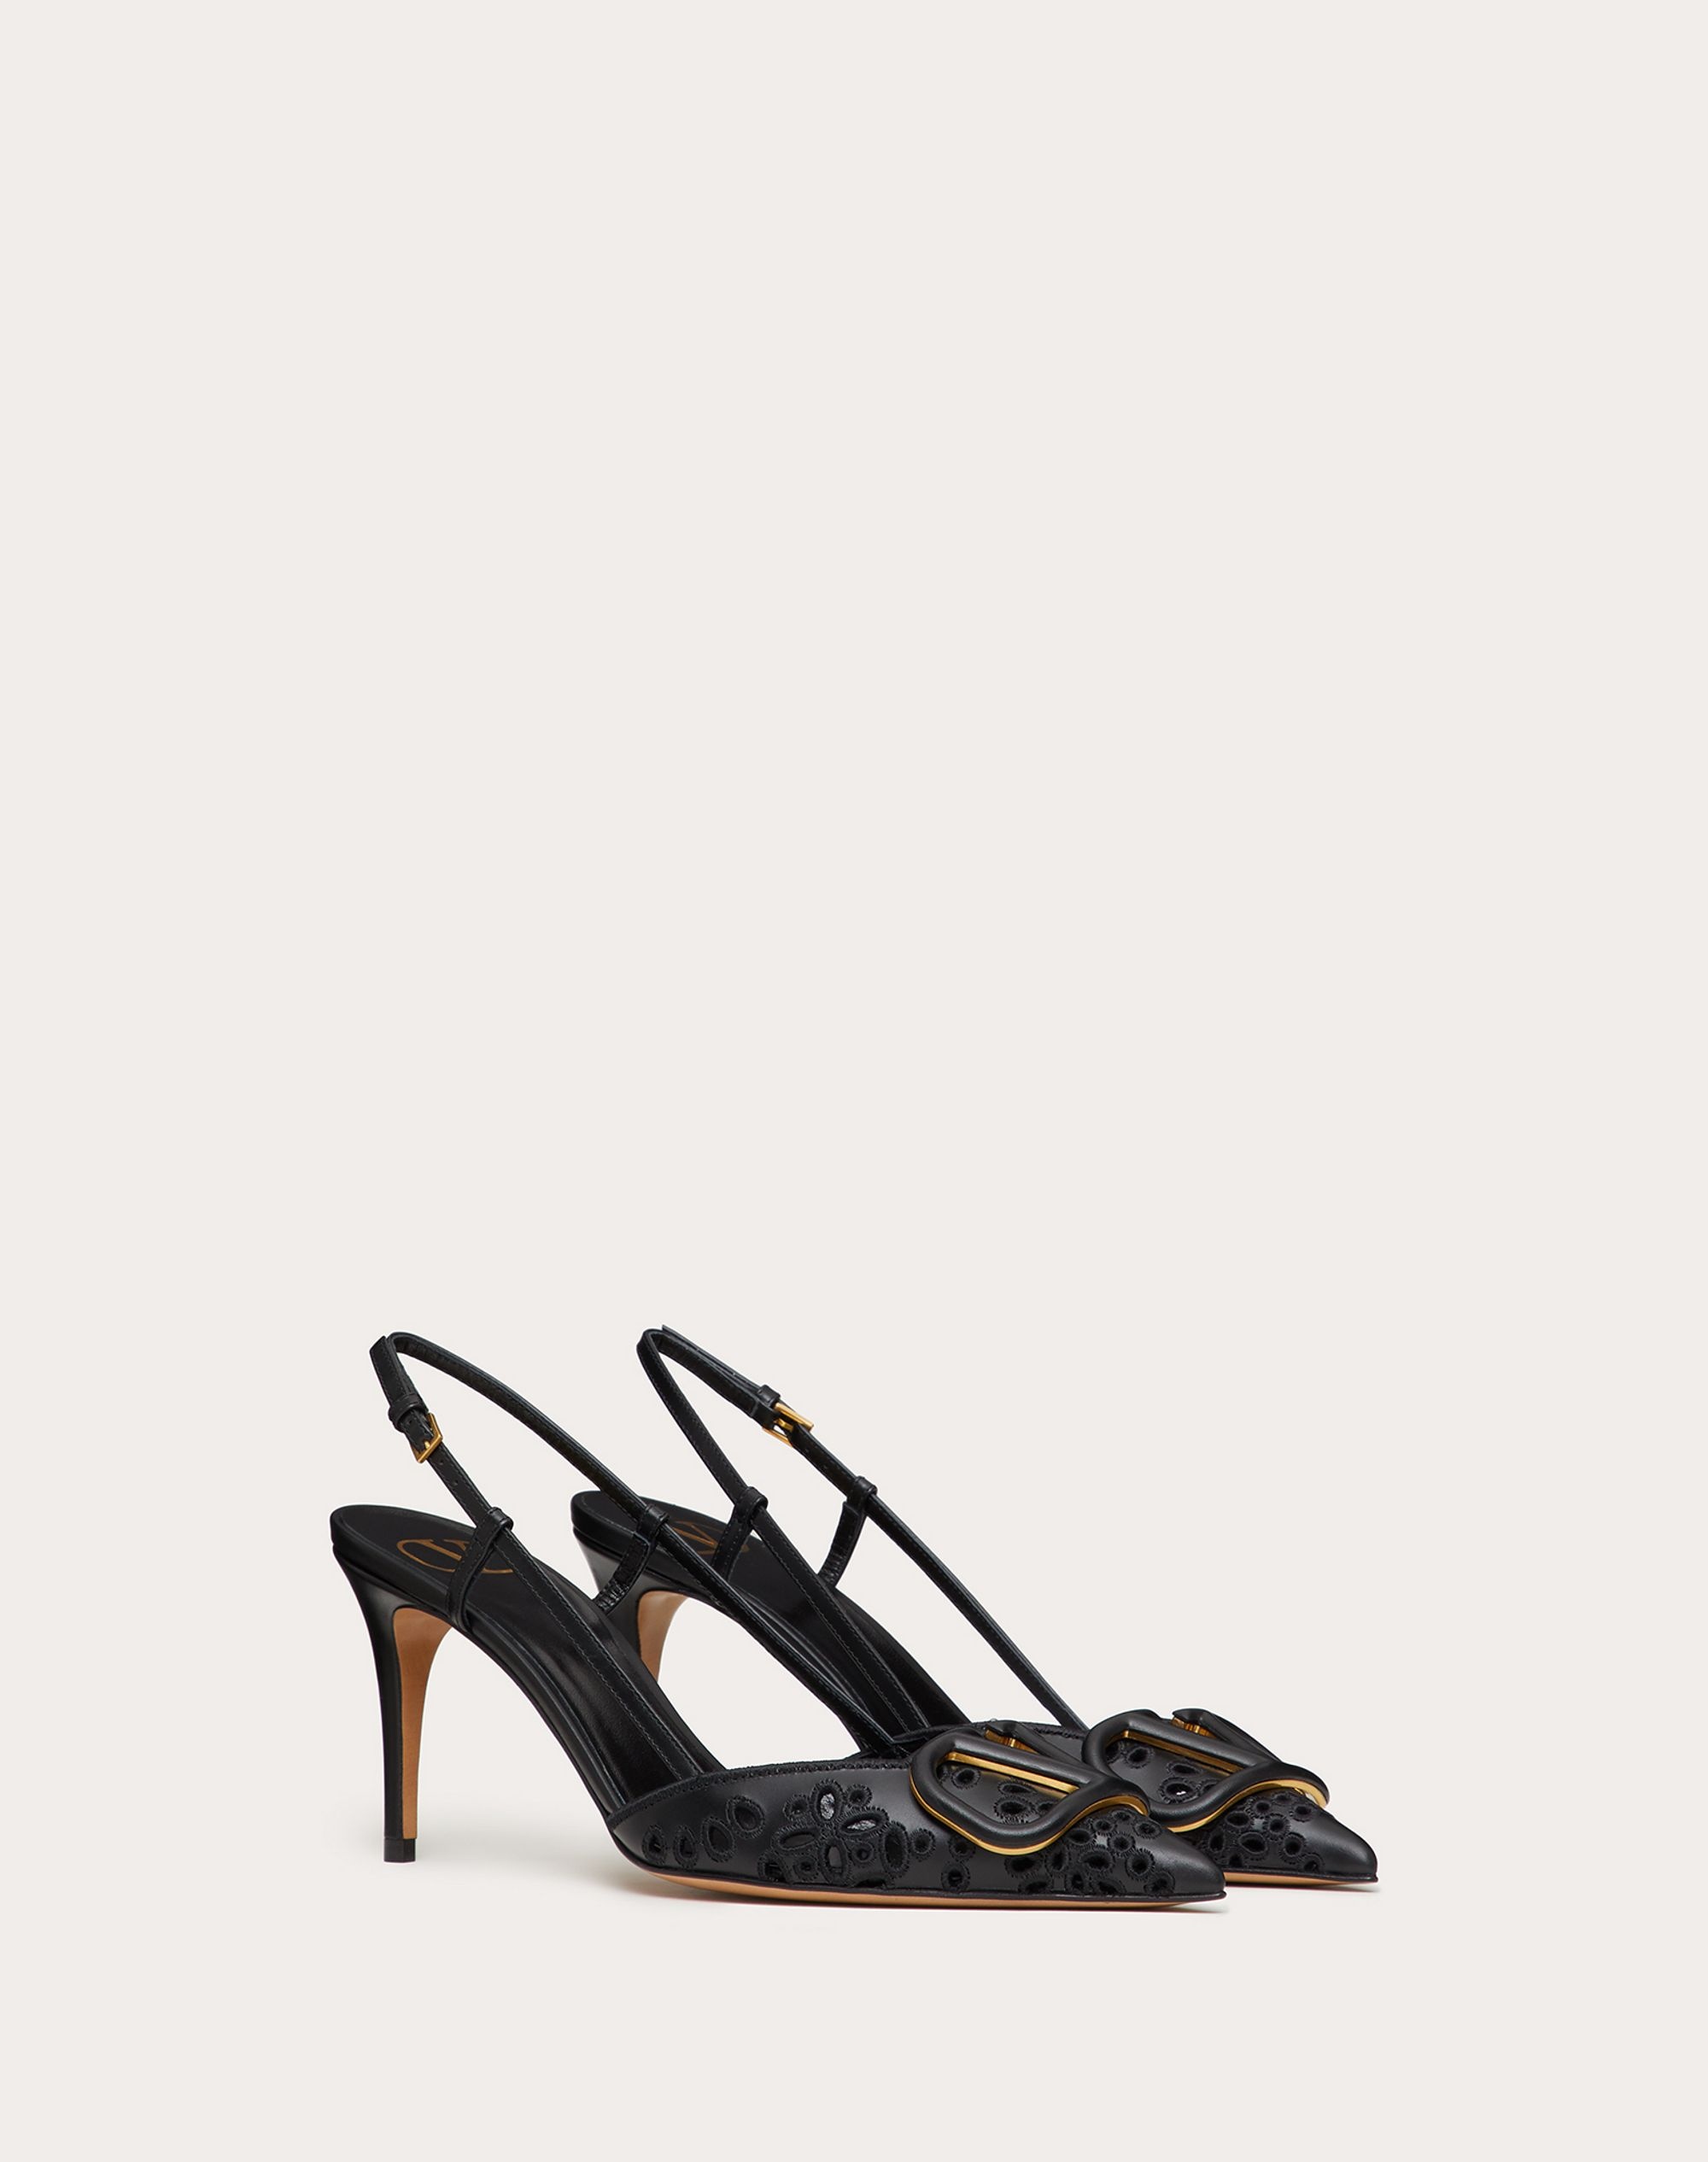 VLOGO SIGNATURE CALFSKIN SLINGBACK PUMP WITH SAN GALLO EMBROIDERY 80 MM - 2